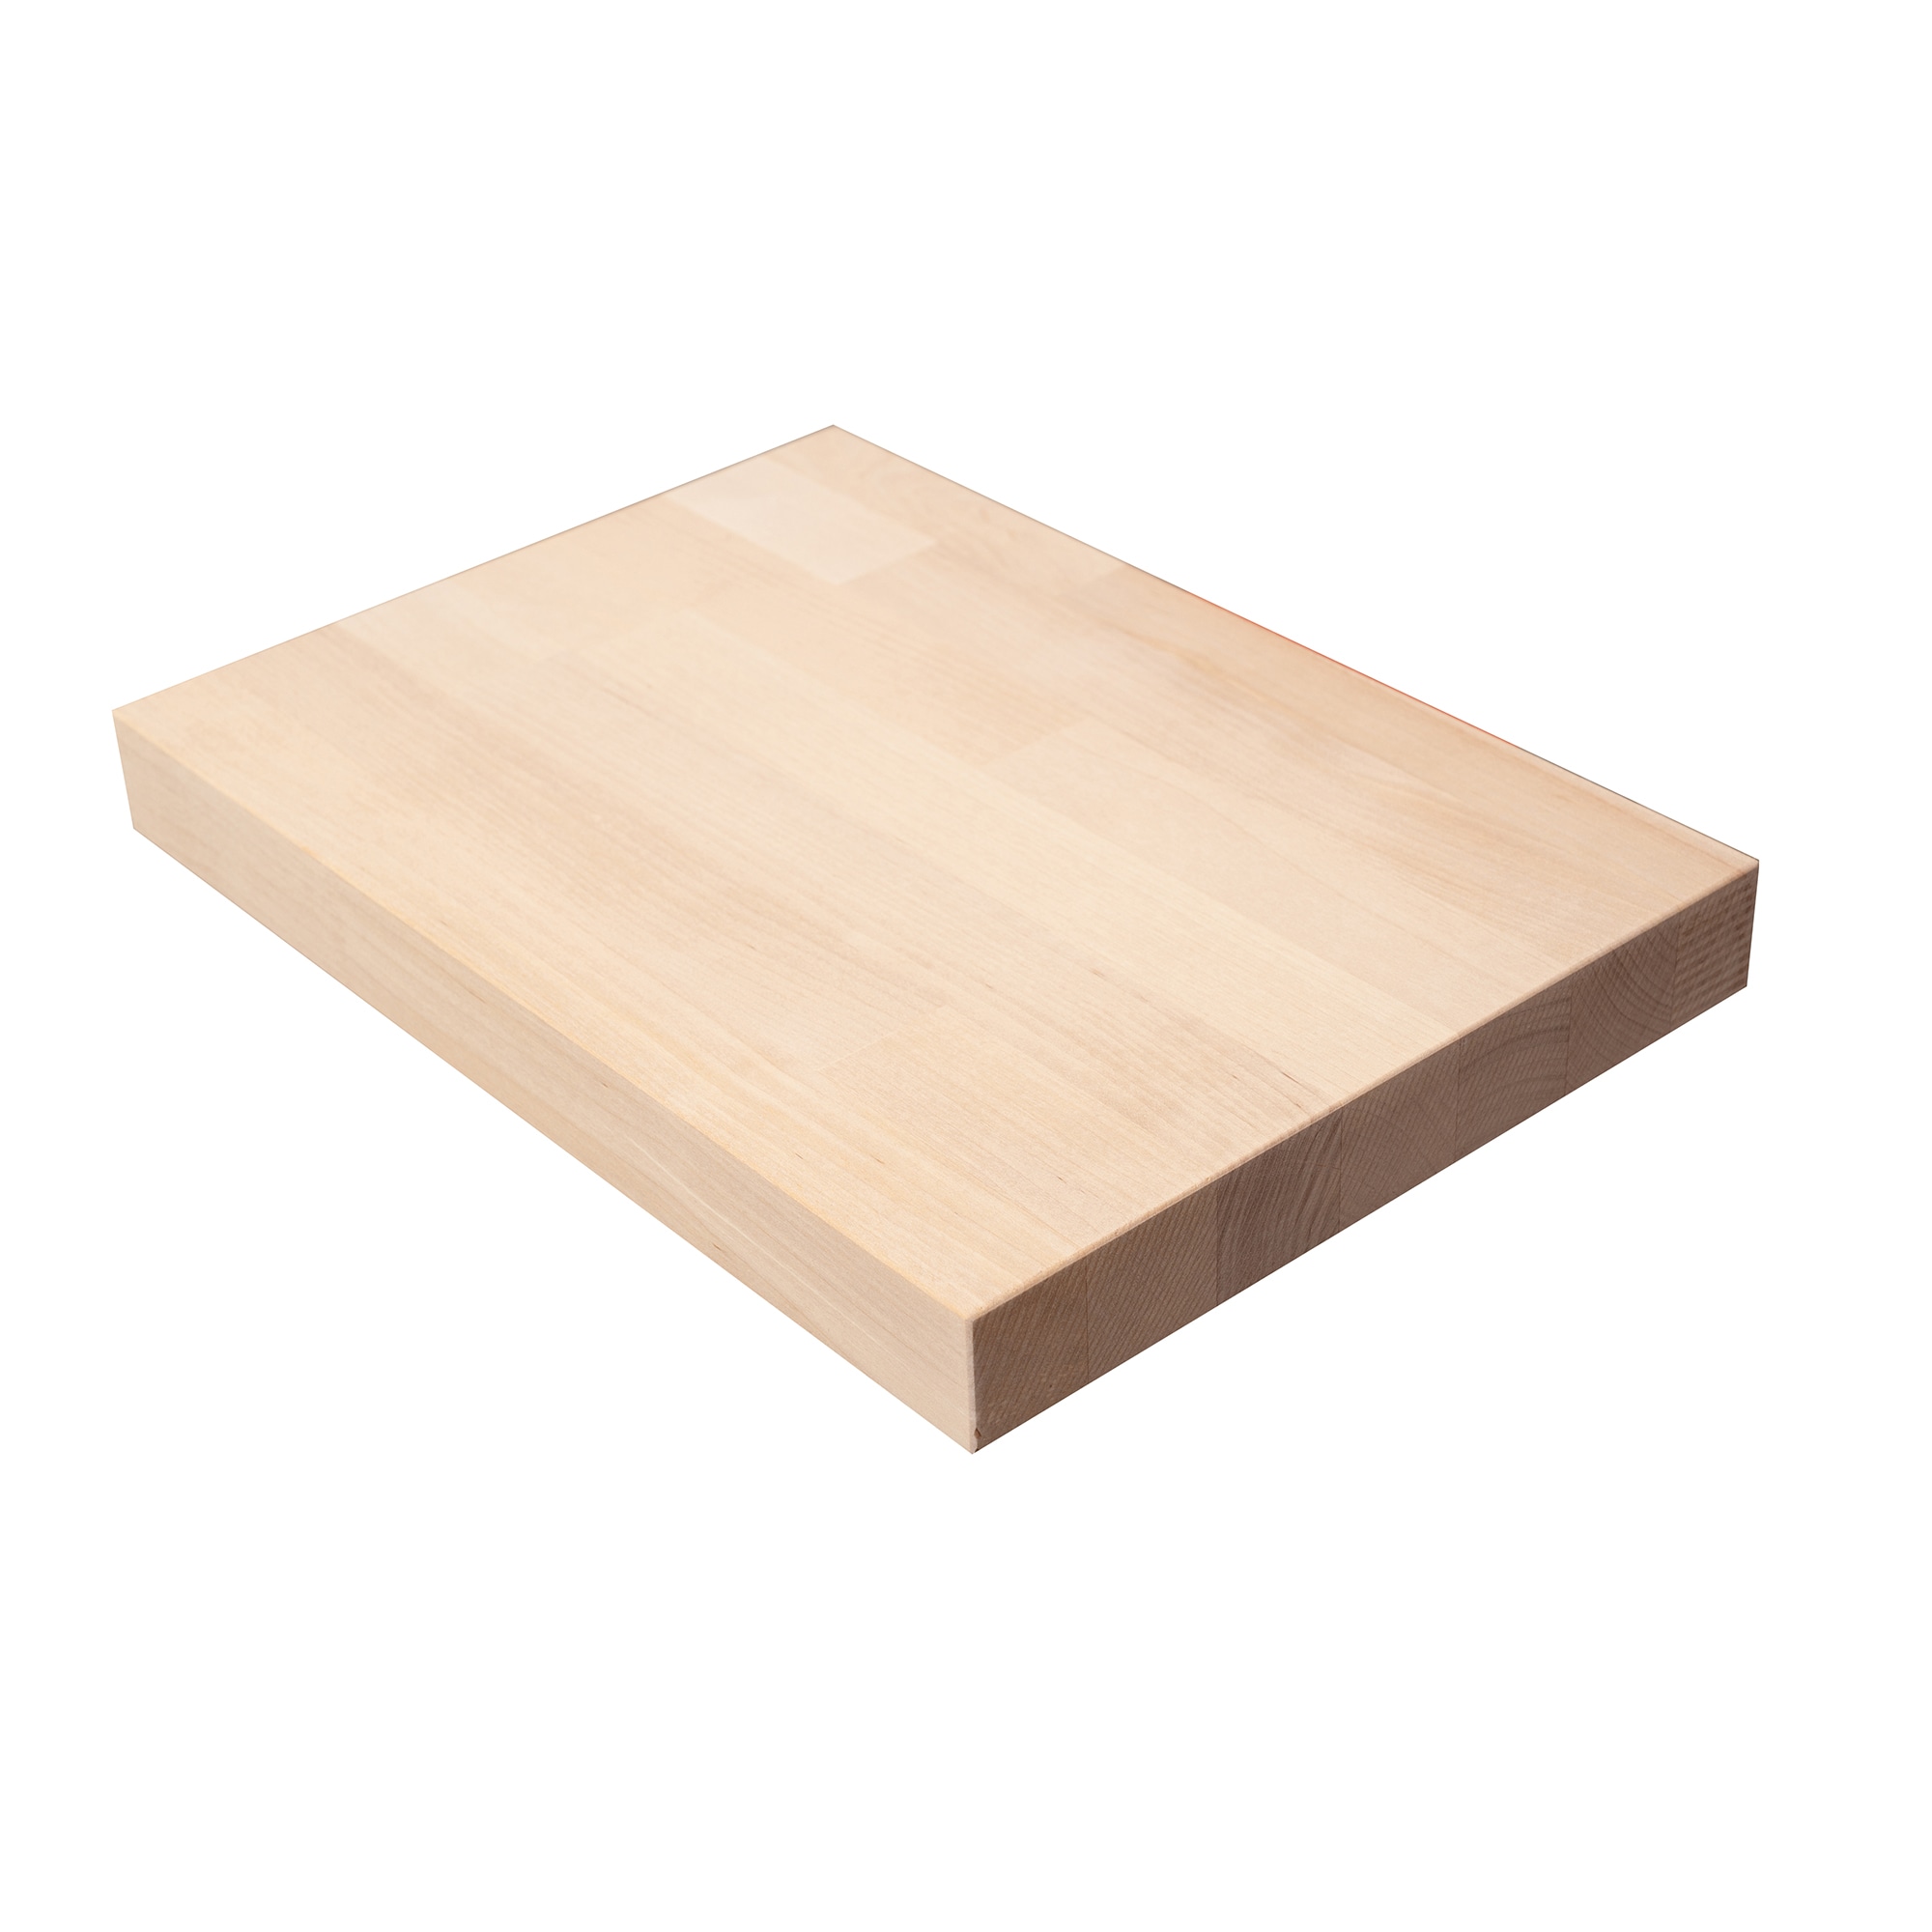 Chop-n-Slice - 20x 15x 1-1/4 - Pack of 6 - John Boos - Cutting Board  Company - Commercial Quality Plastic and Richlite Custom Sized Cutting  Boards